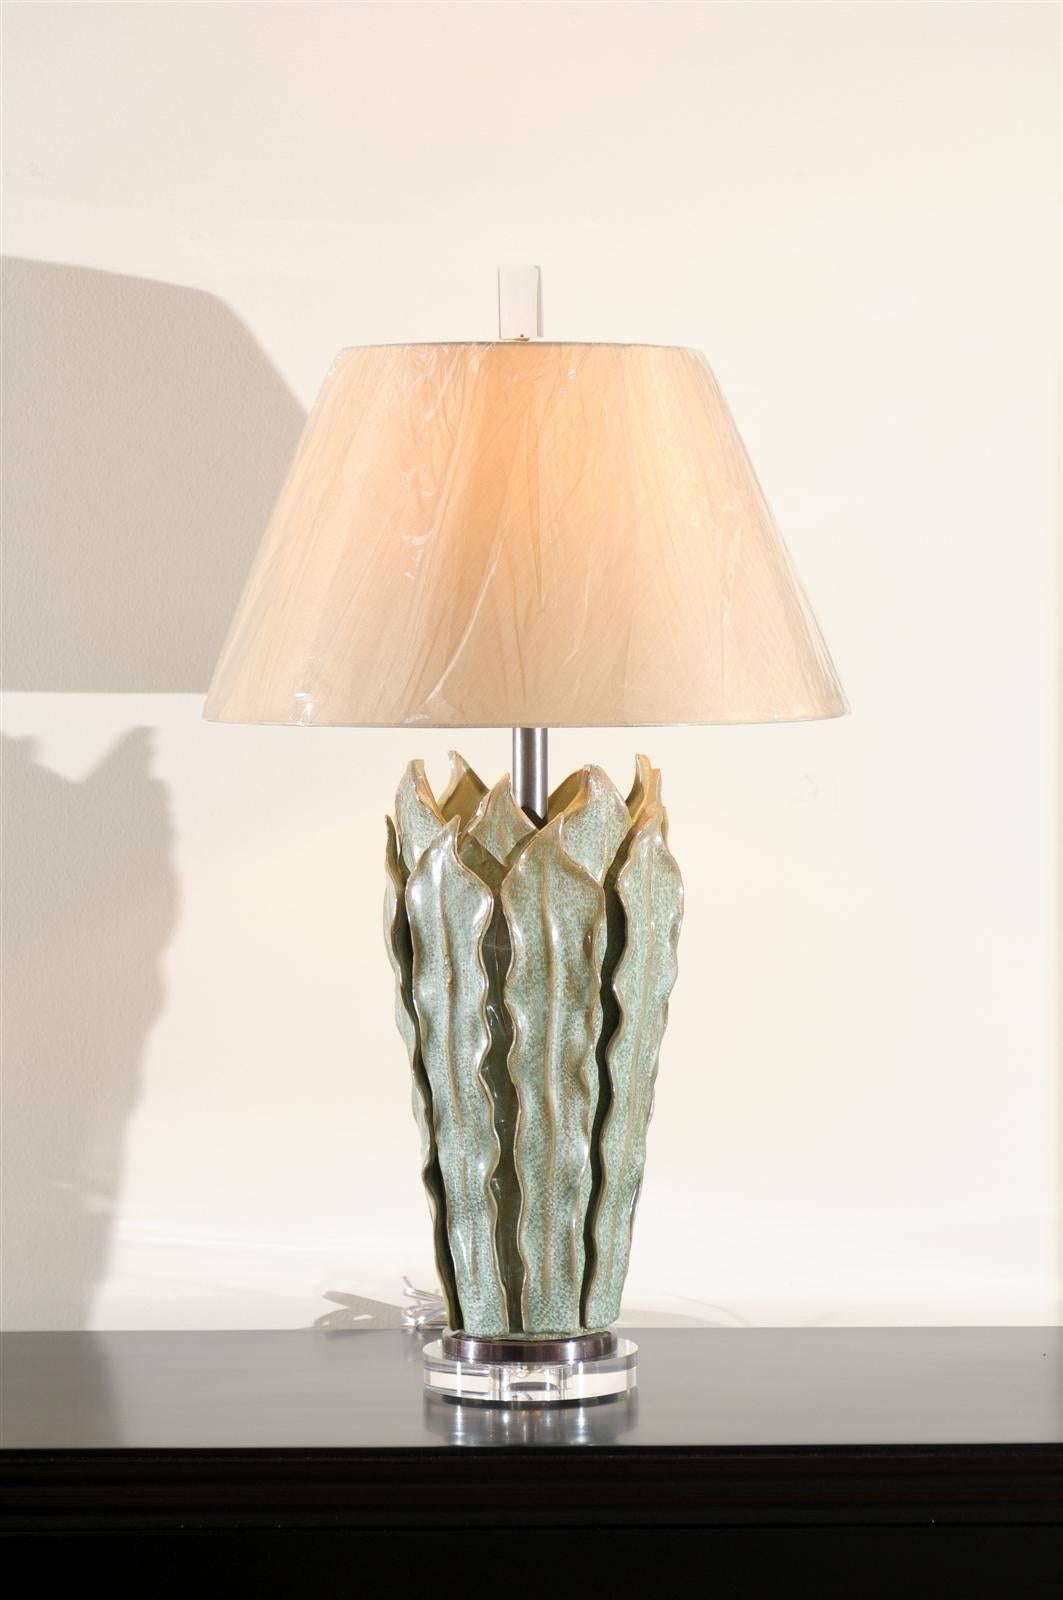 These magnificent lamps are shipped as photographed and described in the narrative. They are custom built using materials of the highest quality and are shipped complete with the new shades, harps and finials shown in the photos.

A fabulous pair